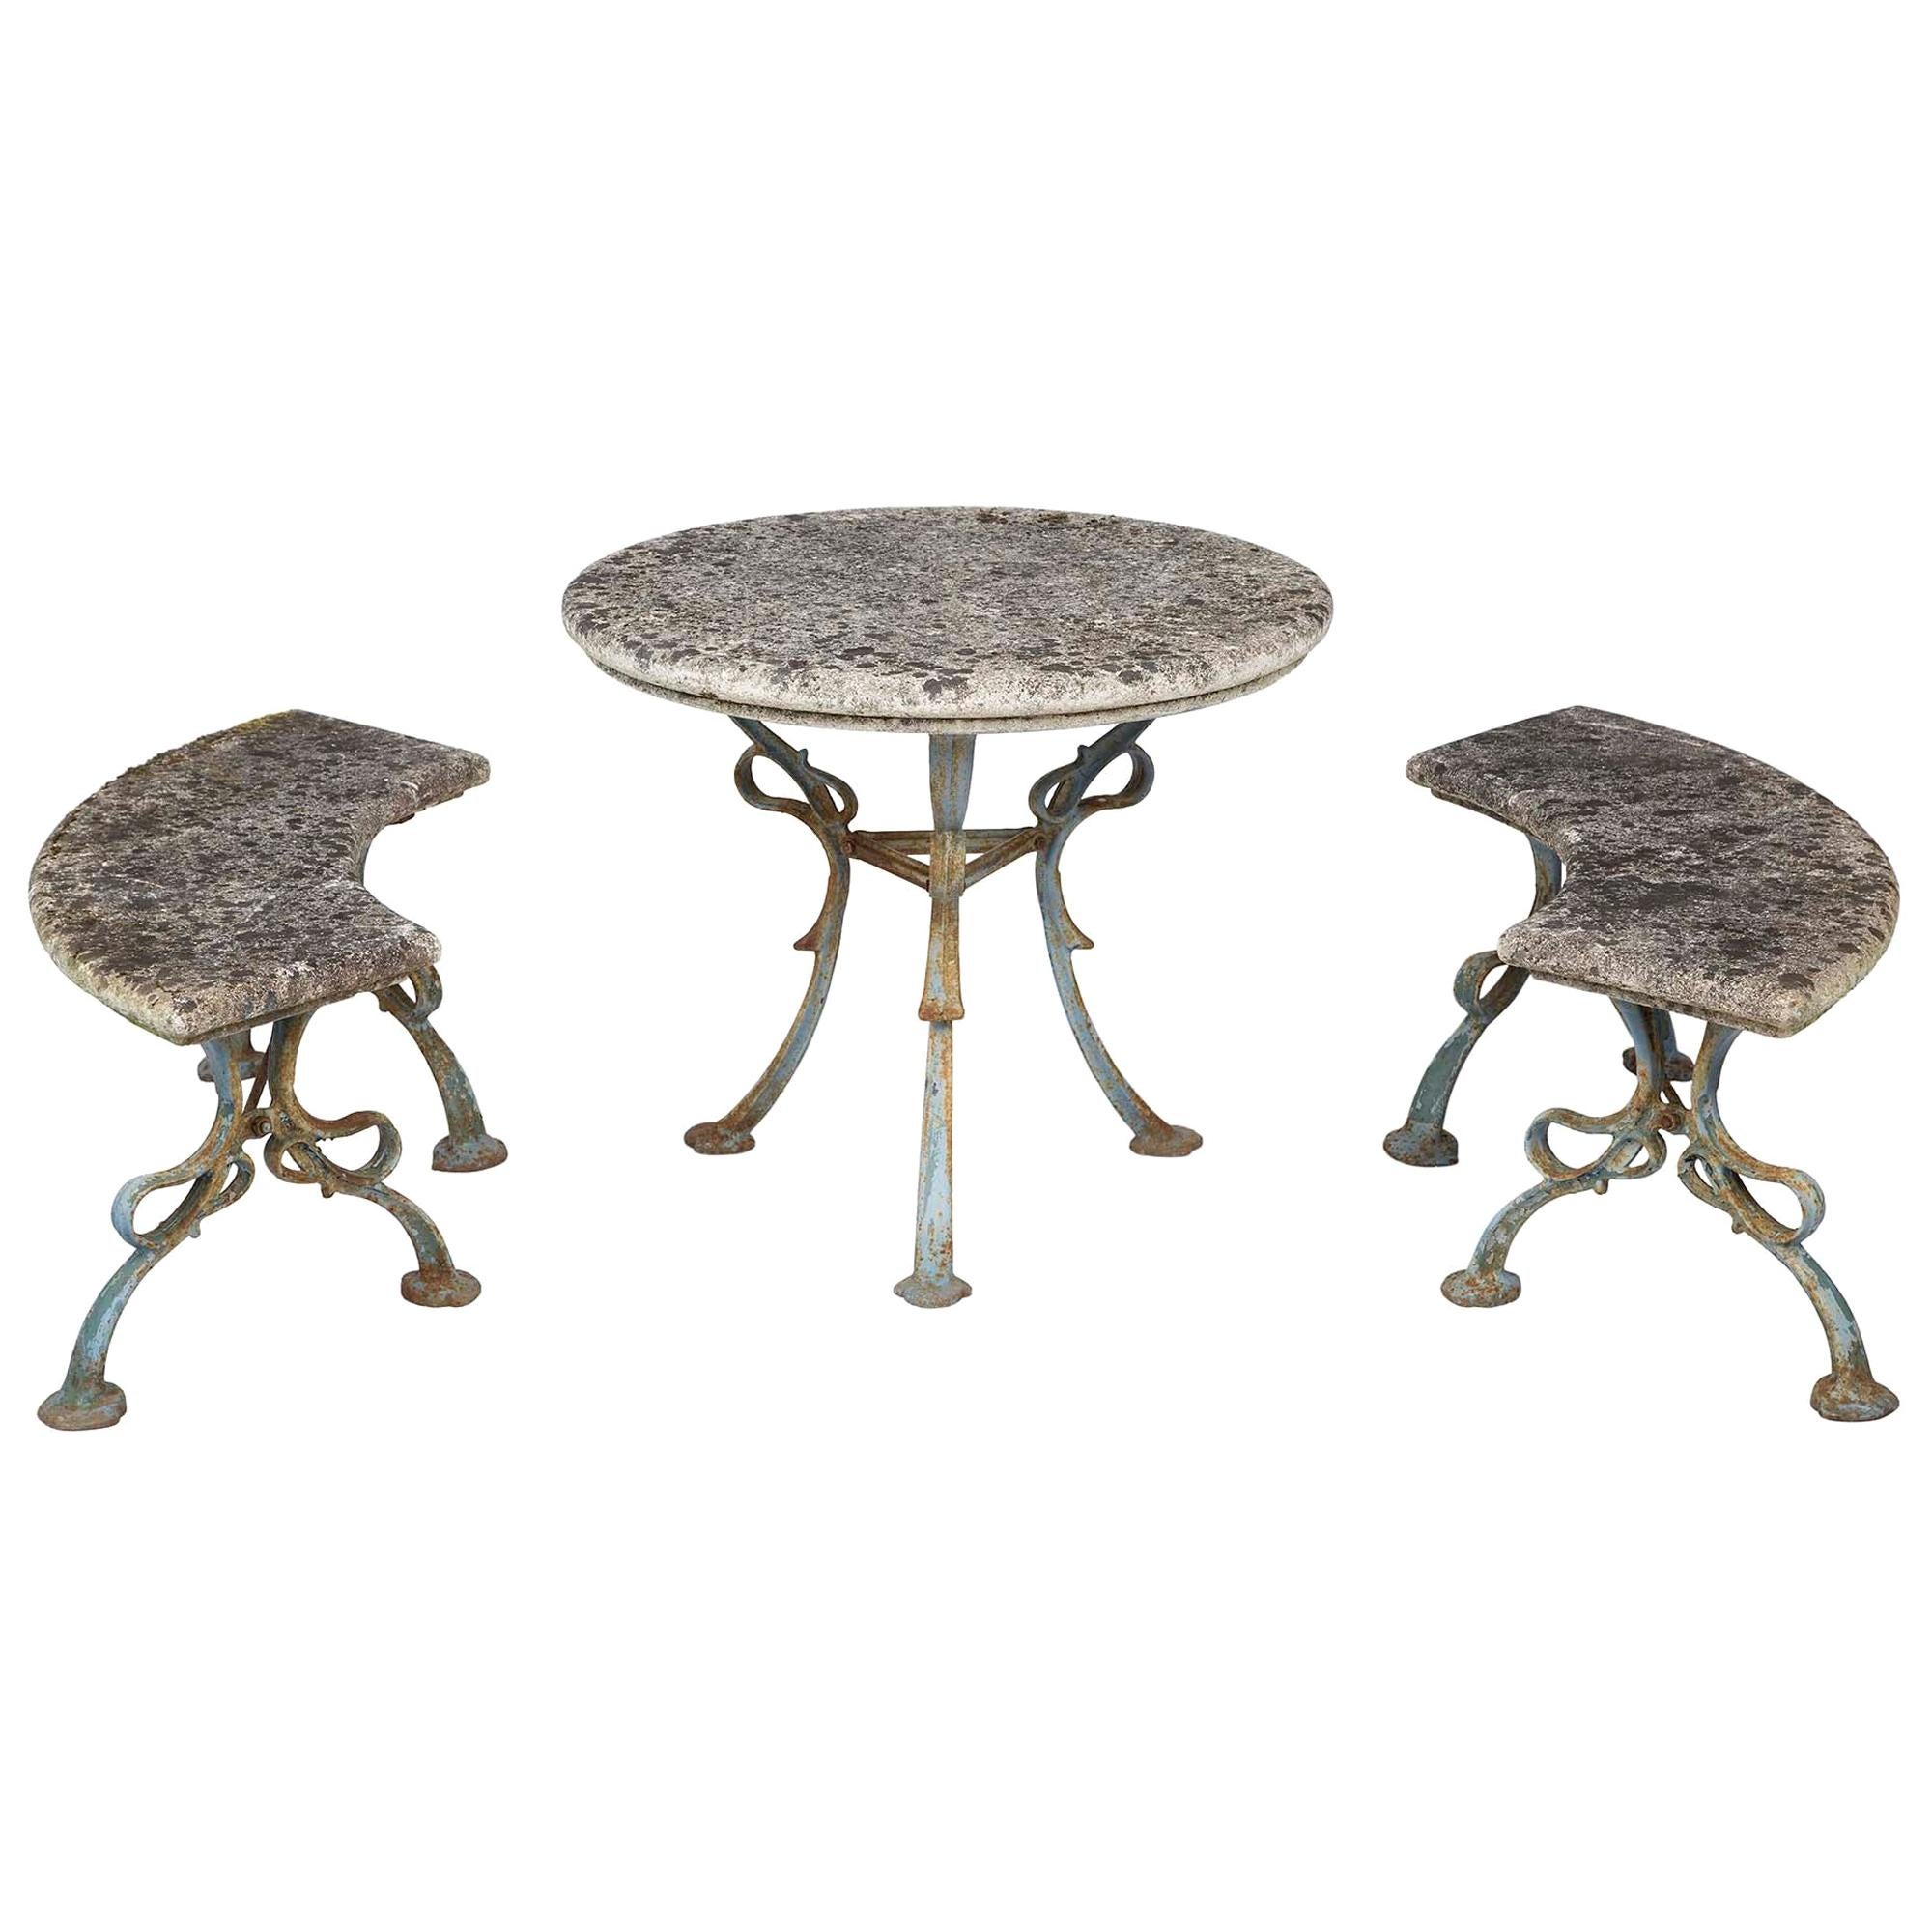 Complete Set of French Patinated Blue Wrought Iron and Stone Table and Benches